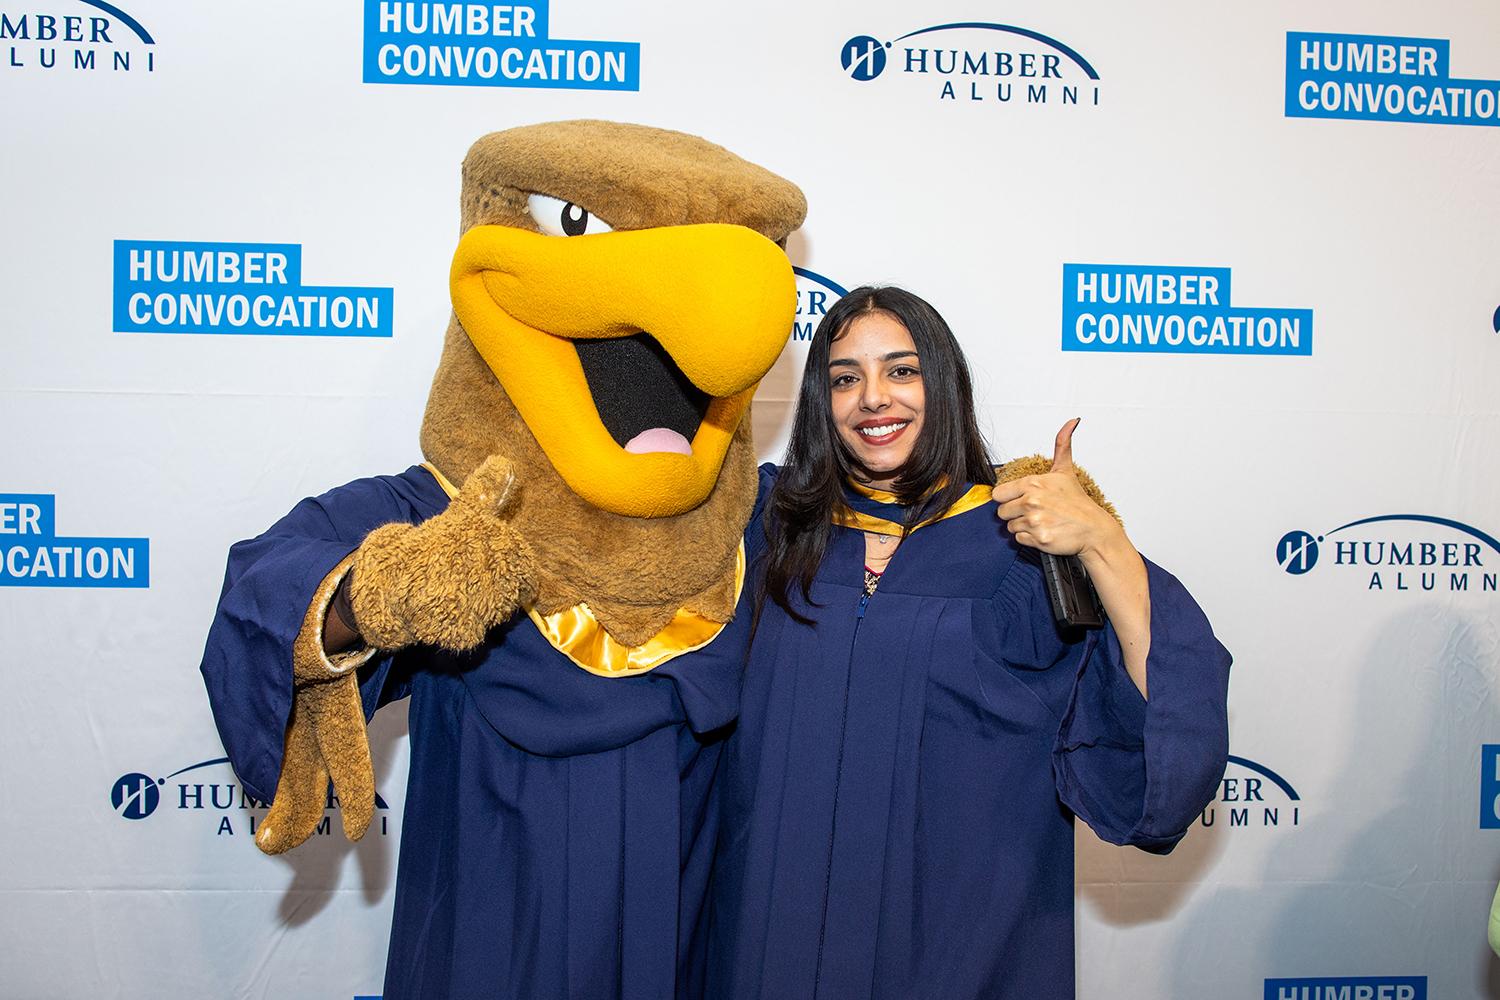 The Humber Hawk mascot poses for a photo giving a thumb’s up with another person wearing a graduation gown. 